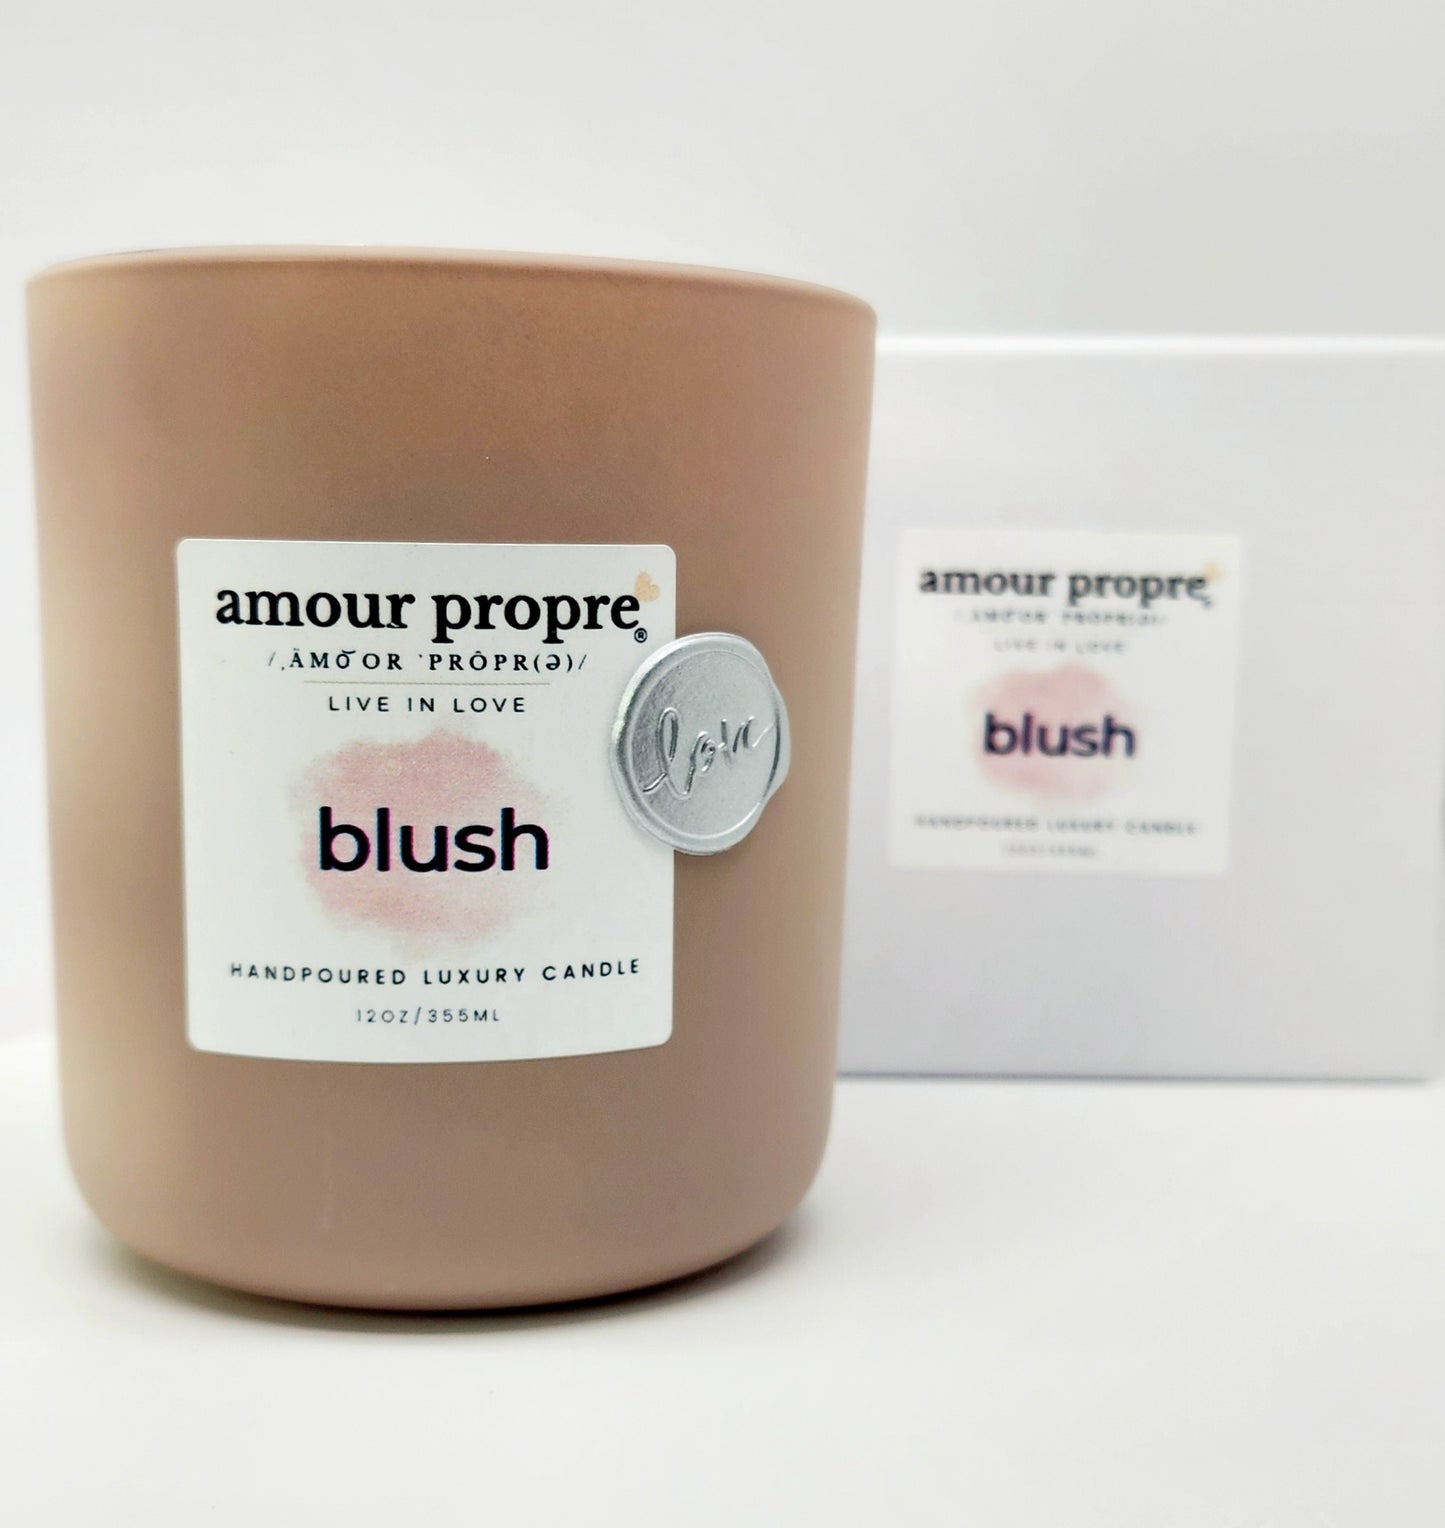 Blush Hand-poured Luxury Candle | 12oz